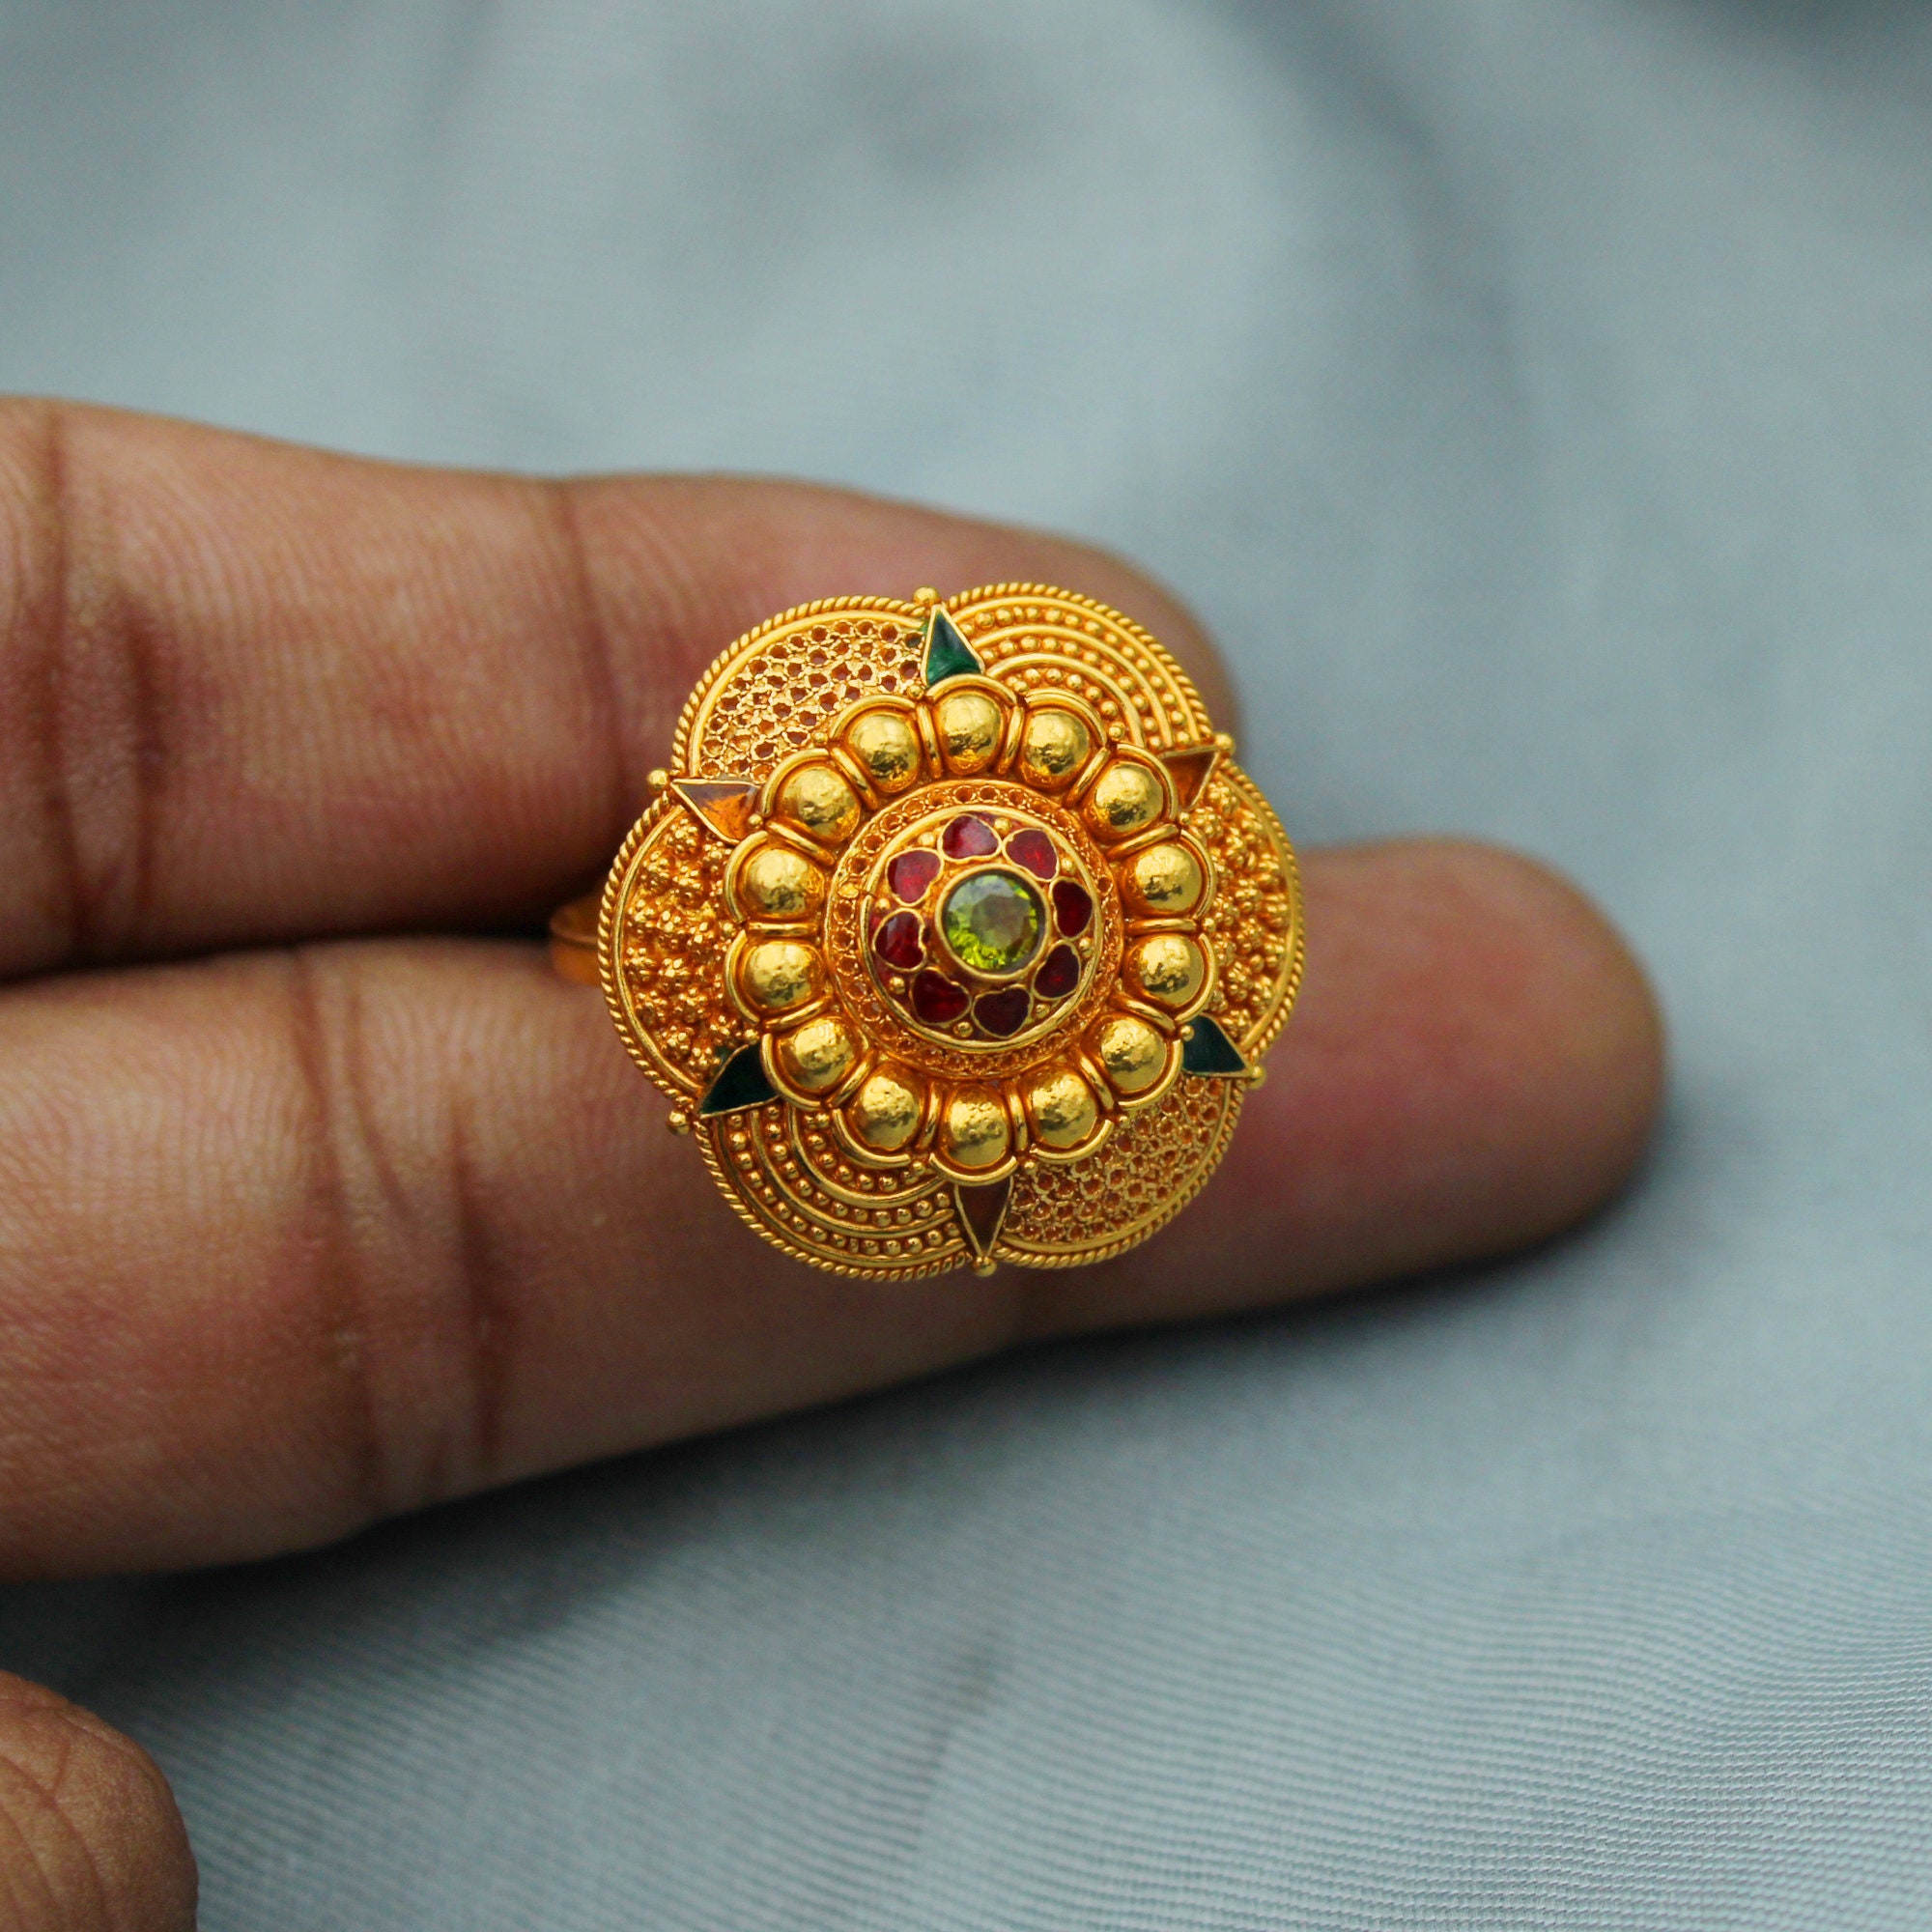 Buy quality New Latest Design Gold Ring in Ahmedabad